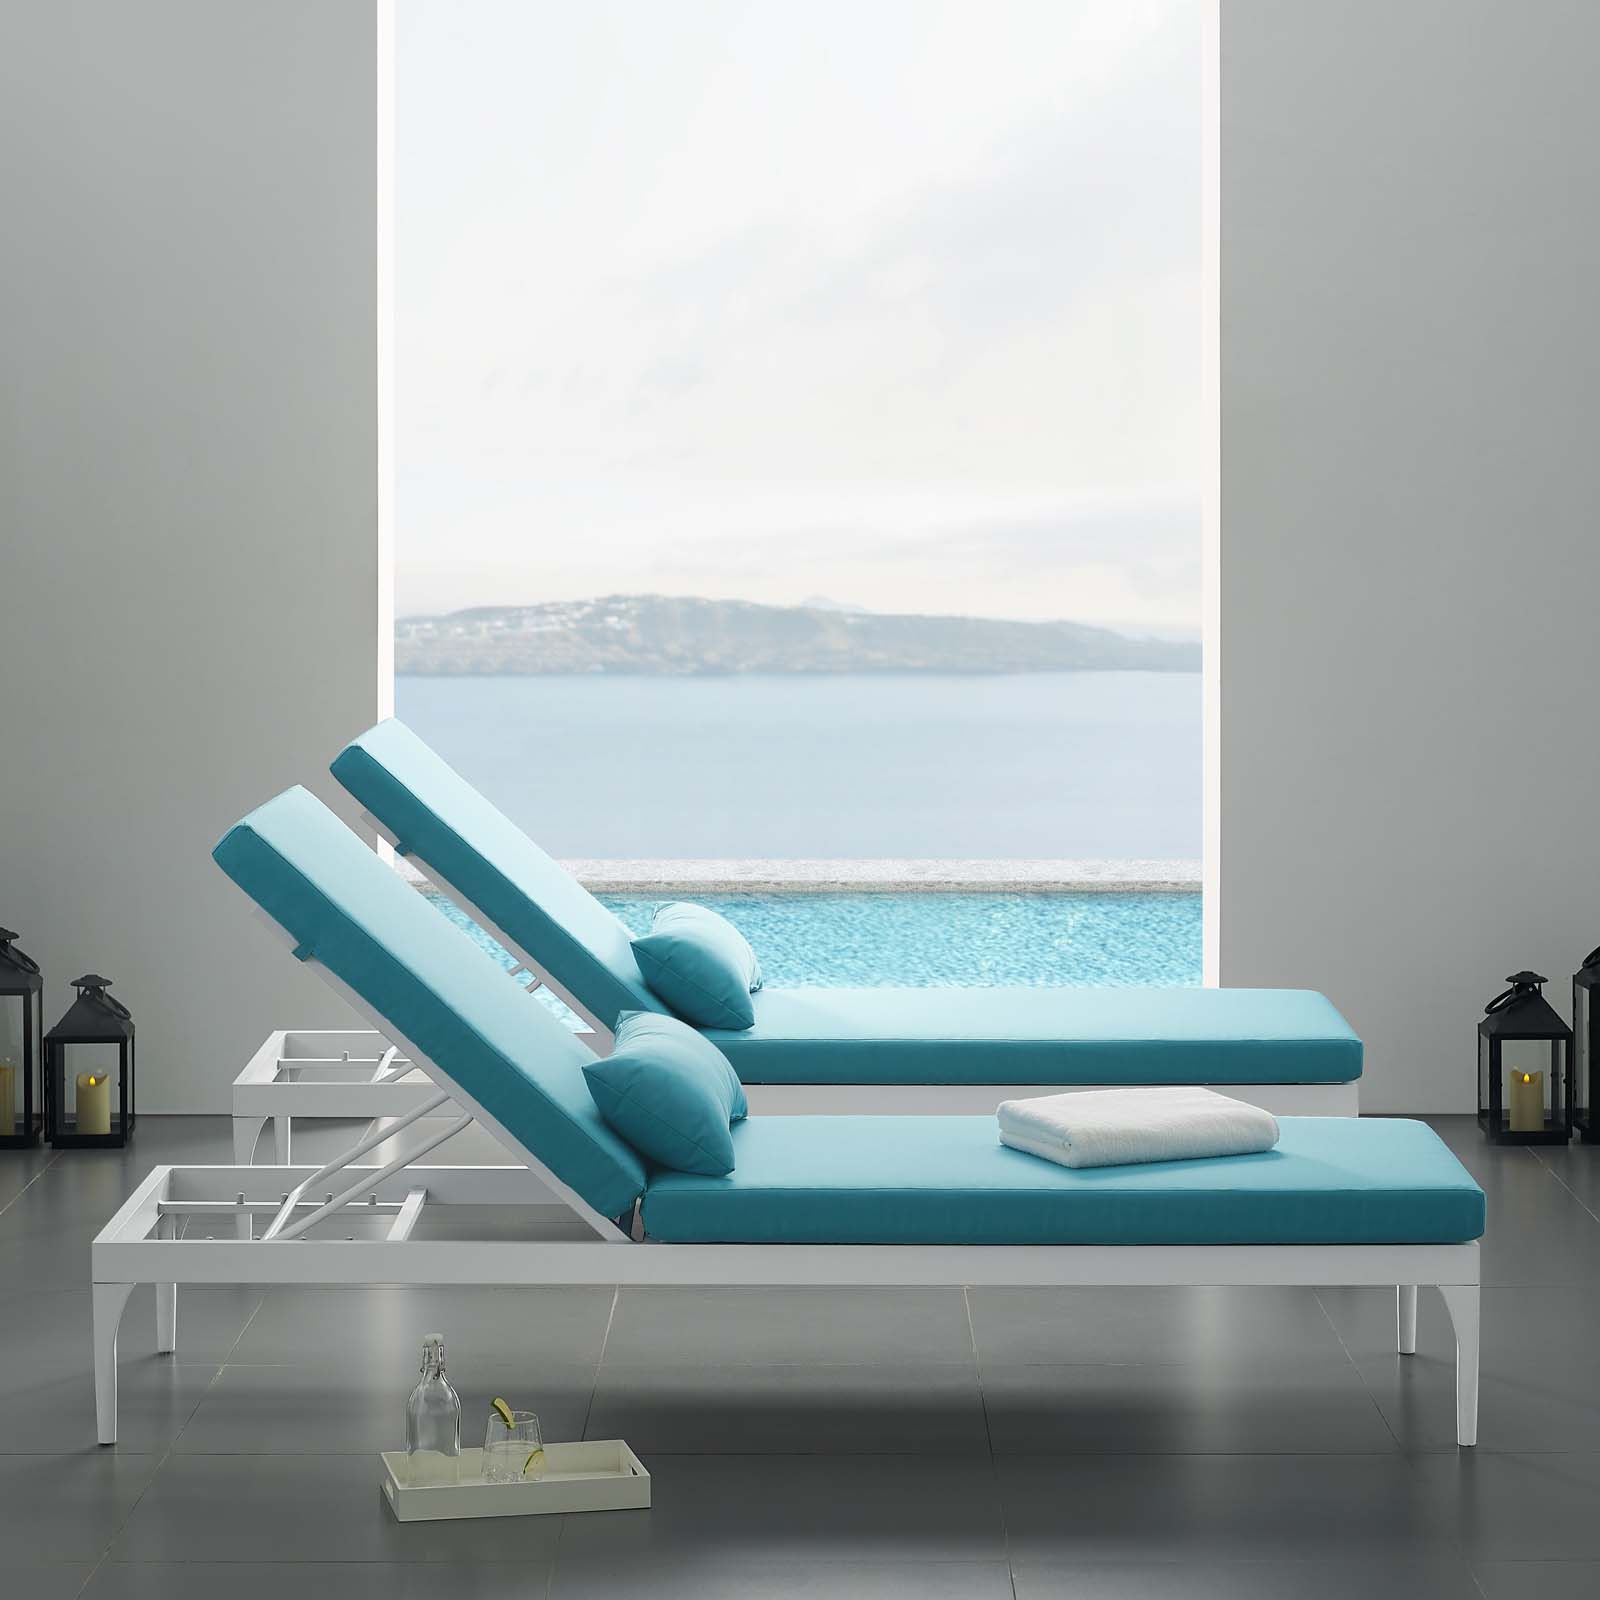 Modern Contemporary Urban Design Outdoor Patio Balcony Garden Furniture Lounge Chair Chaise, Fabric Metal Steel, White Blue - image 2 of 7